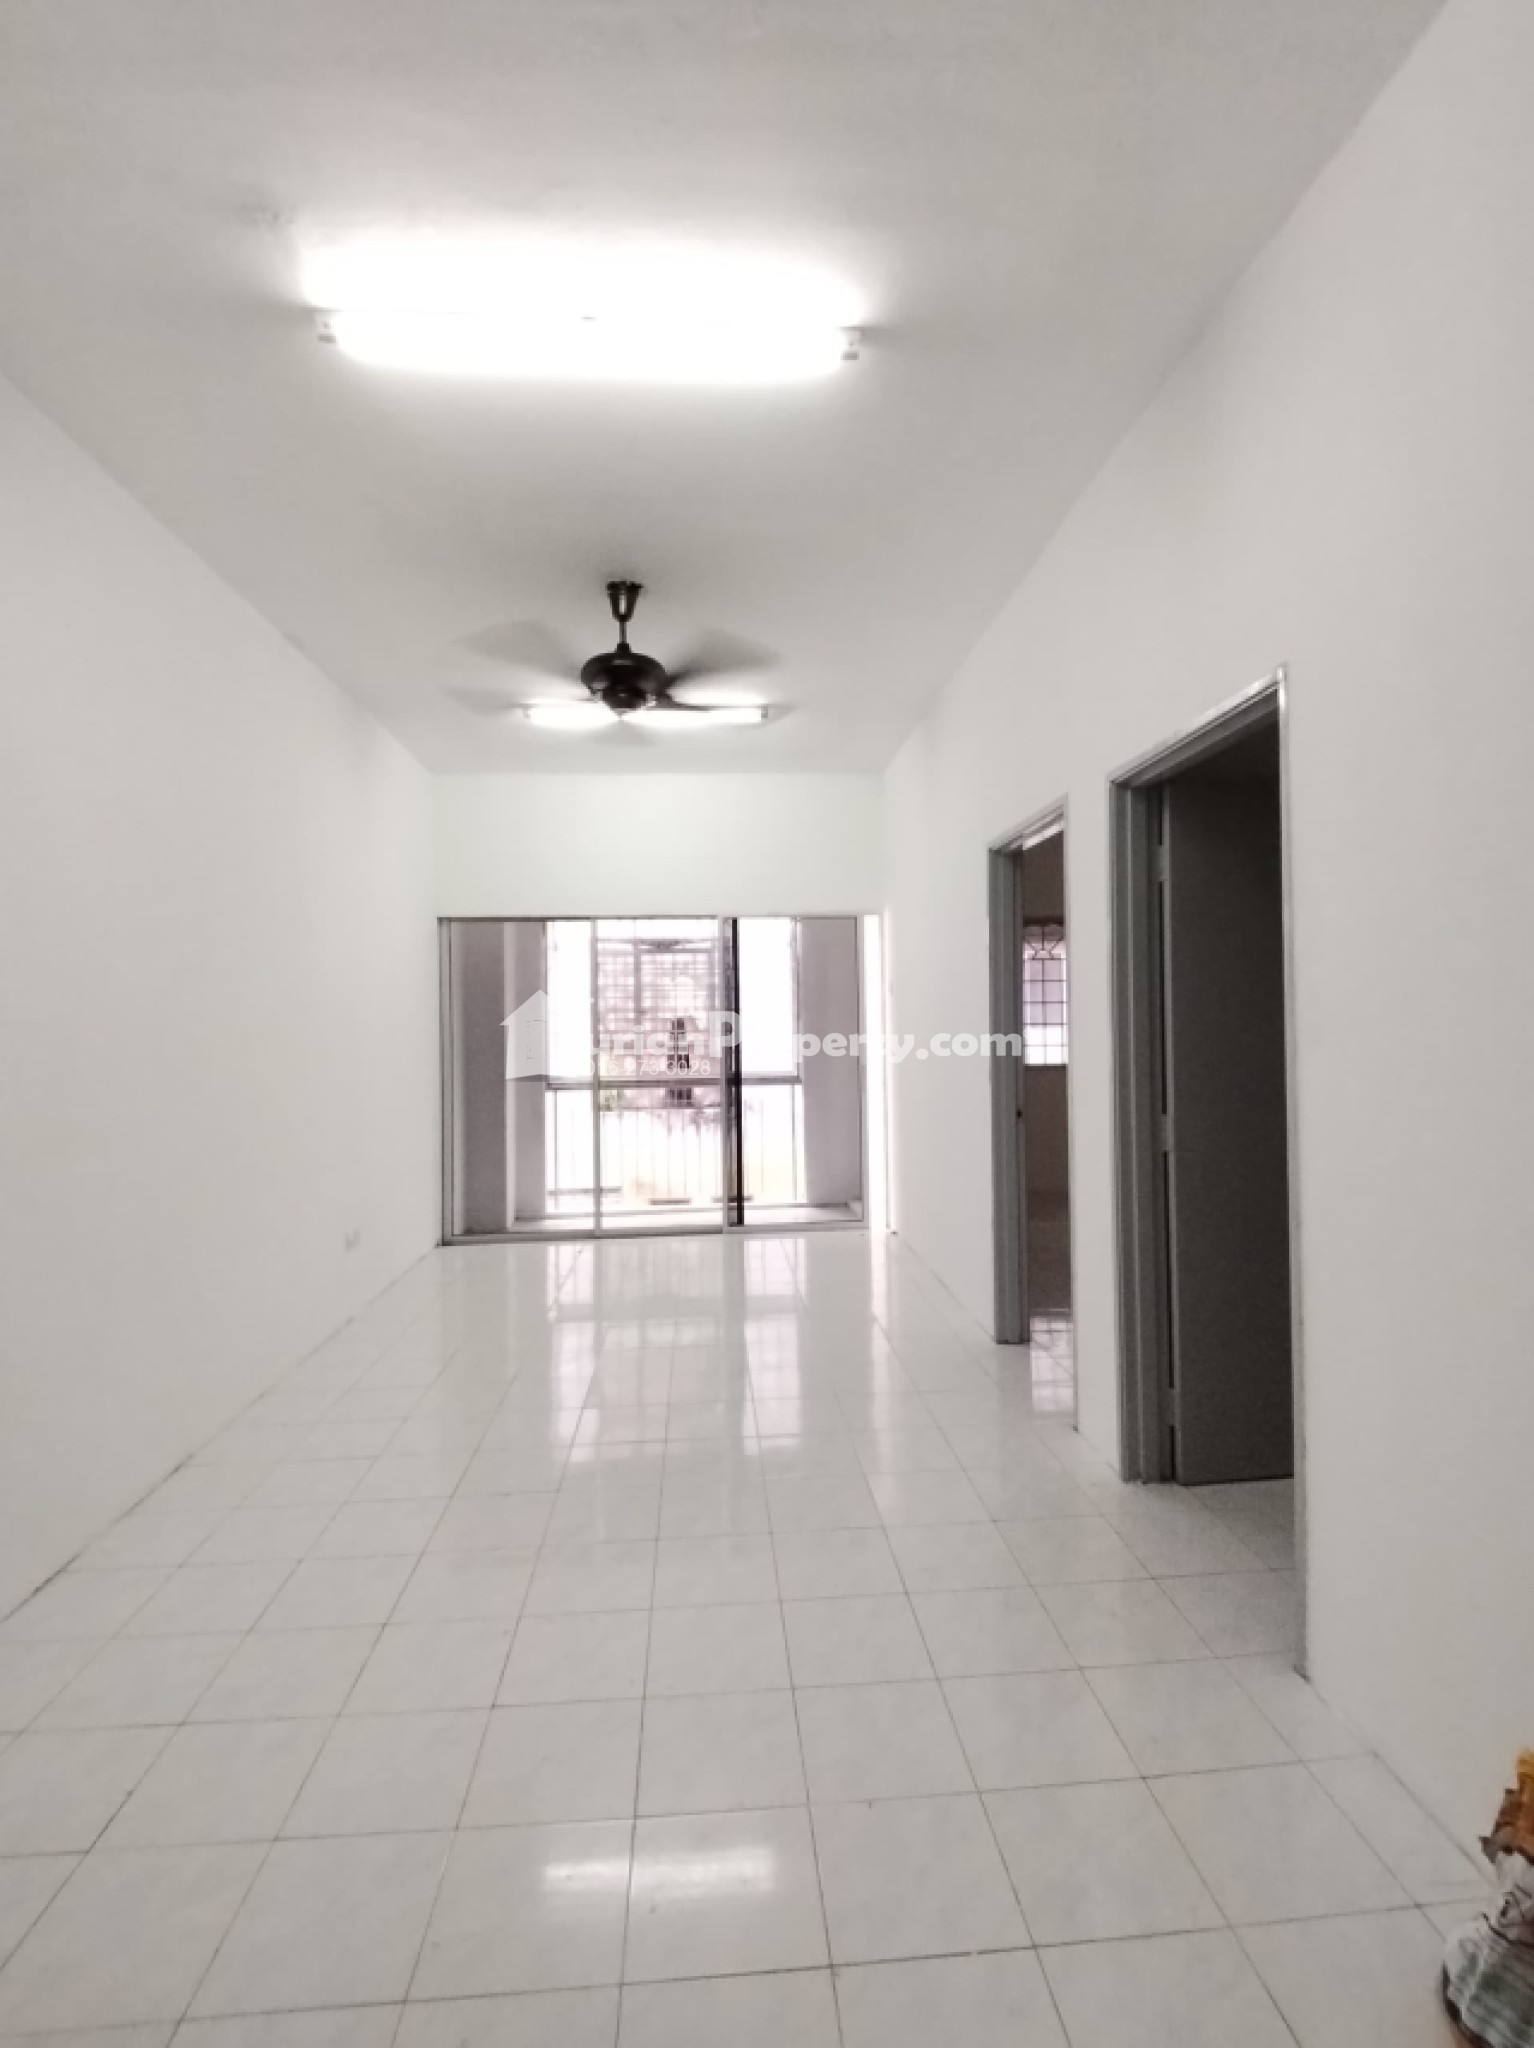 Apartment For Sale at Taman Orkid